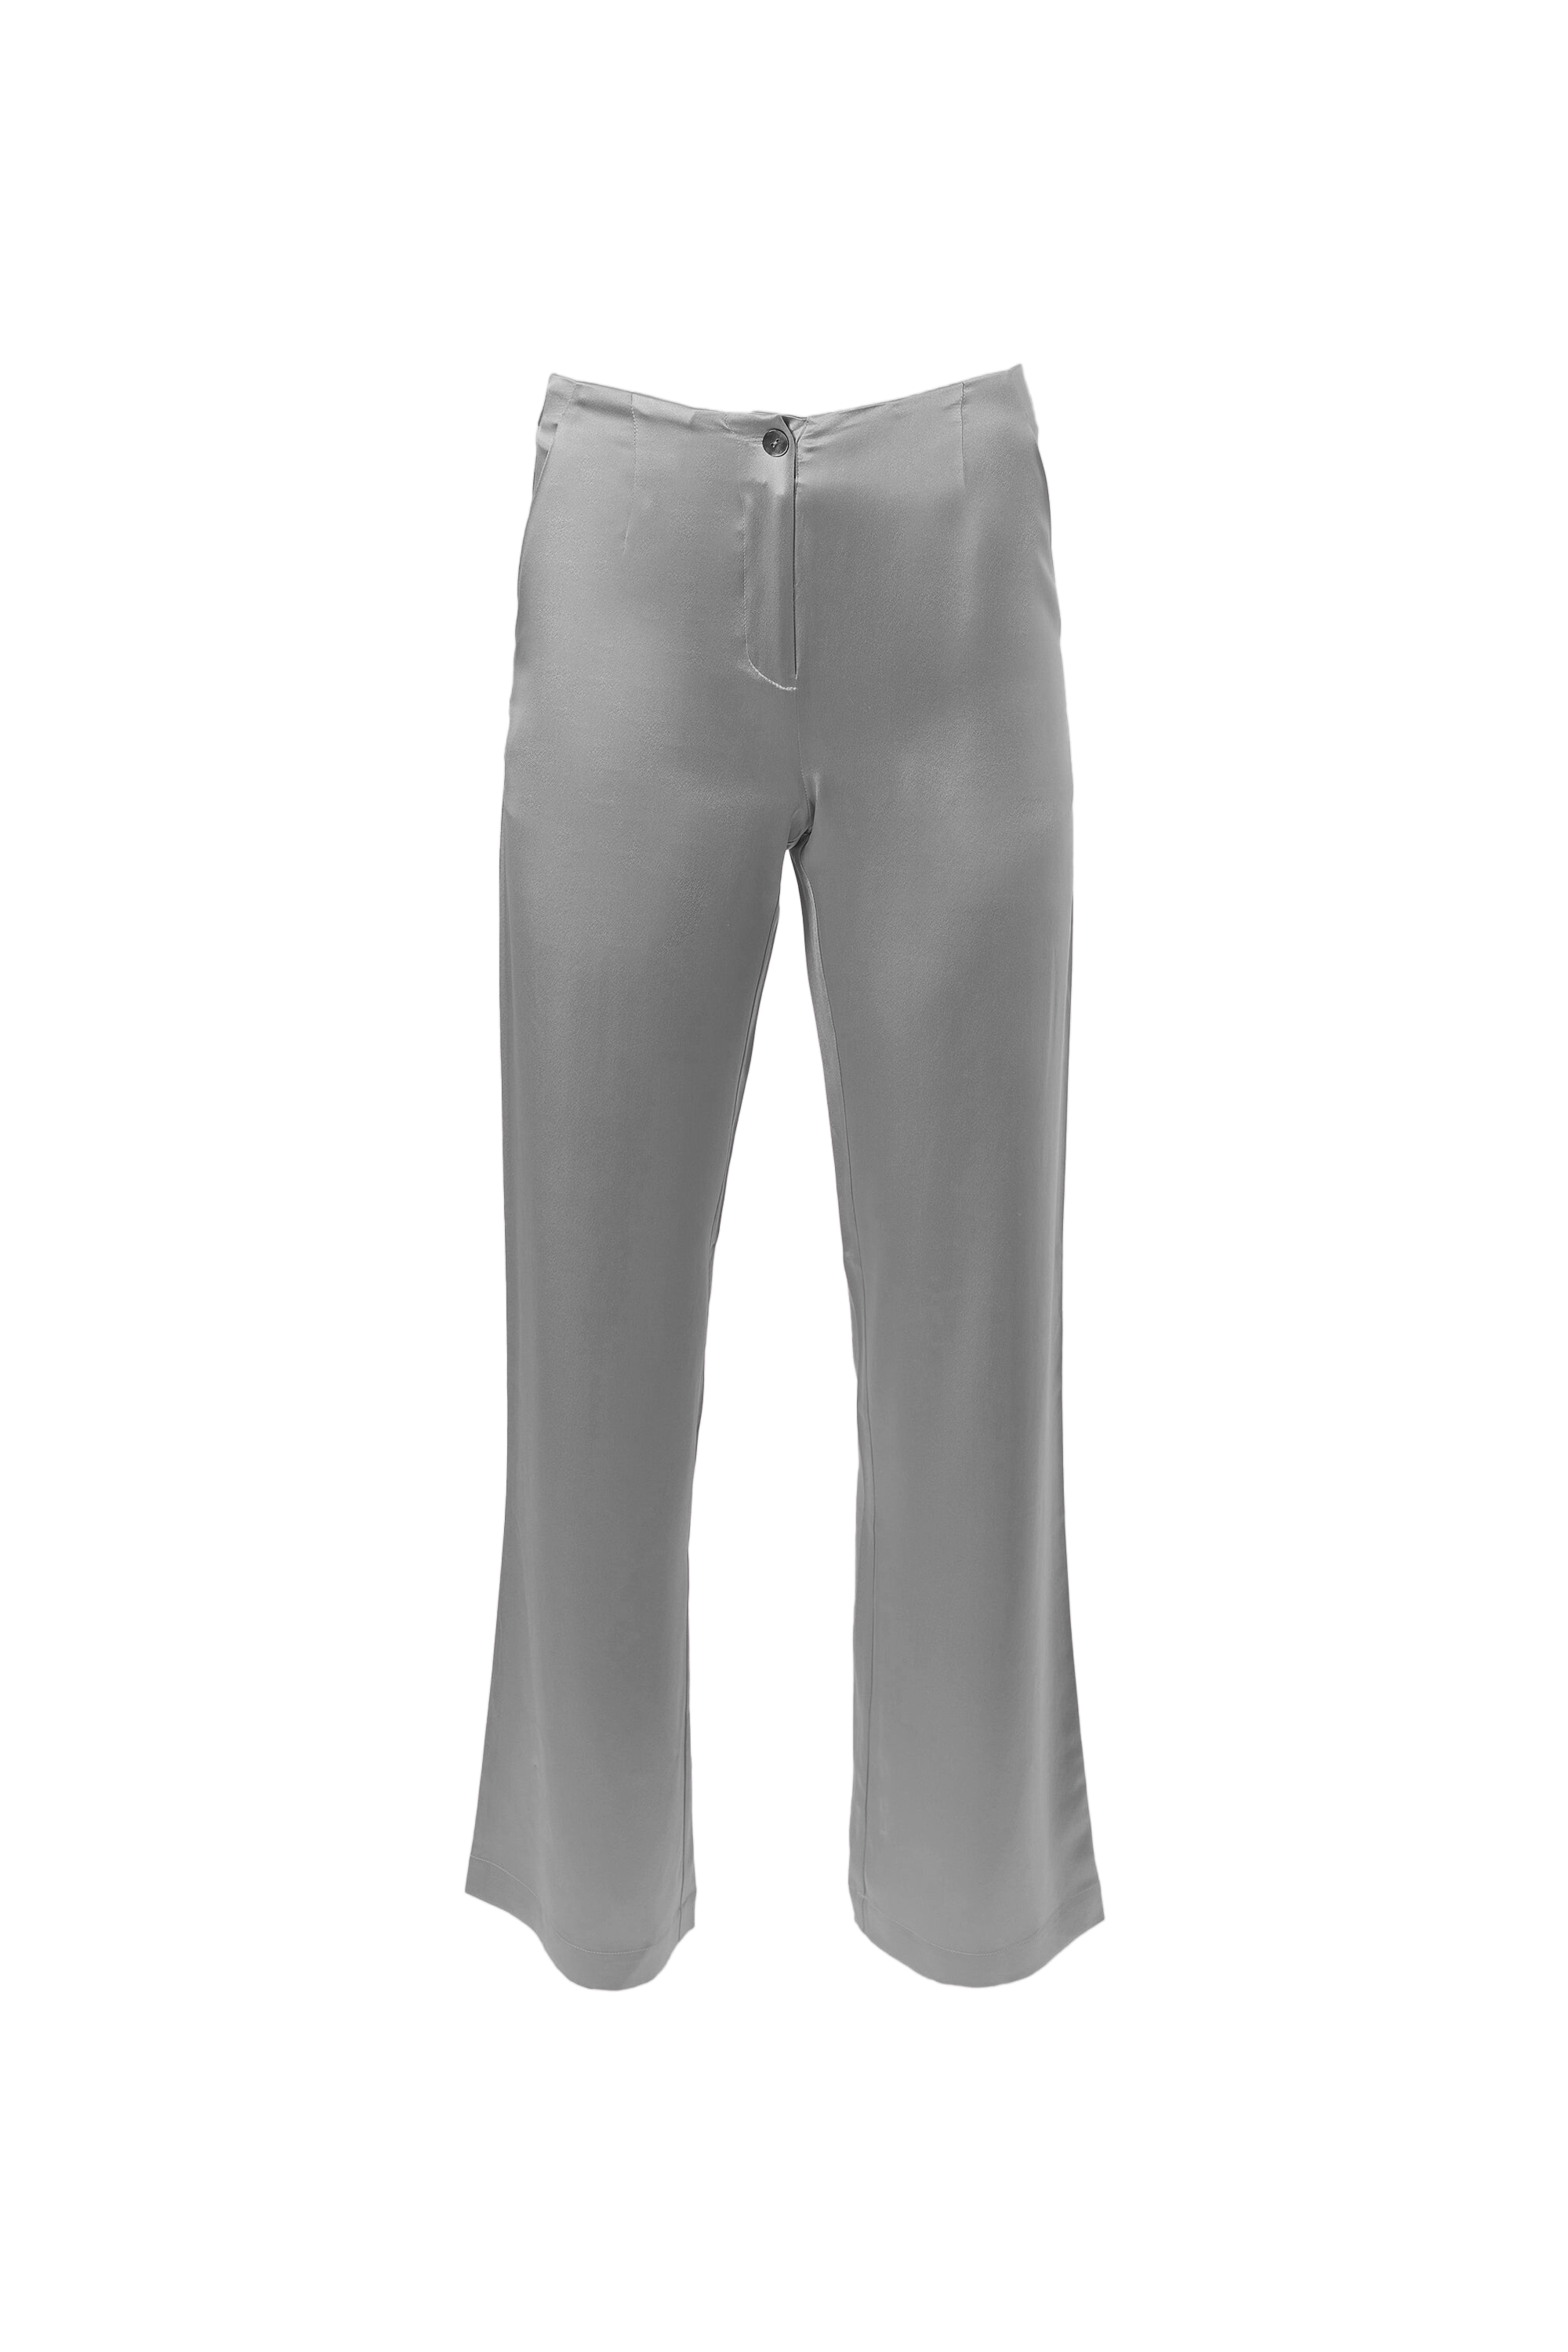 Classic Straight Leg Pants In Stone Grey – DIOMI